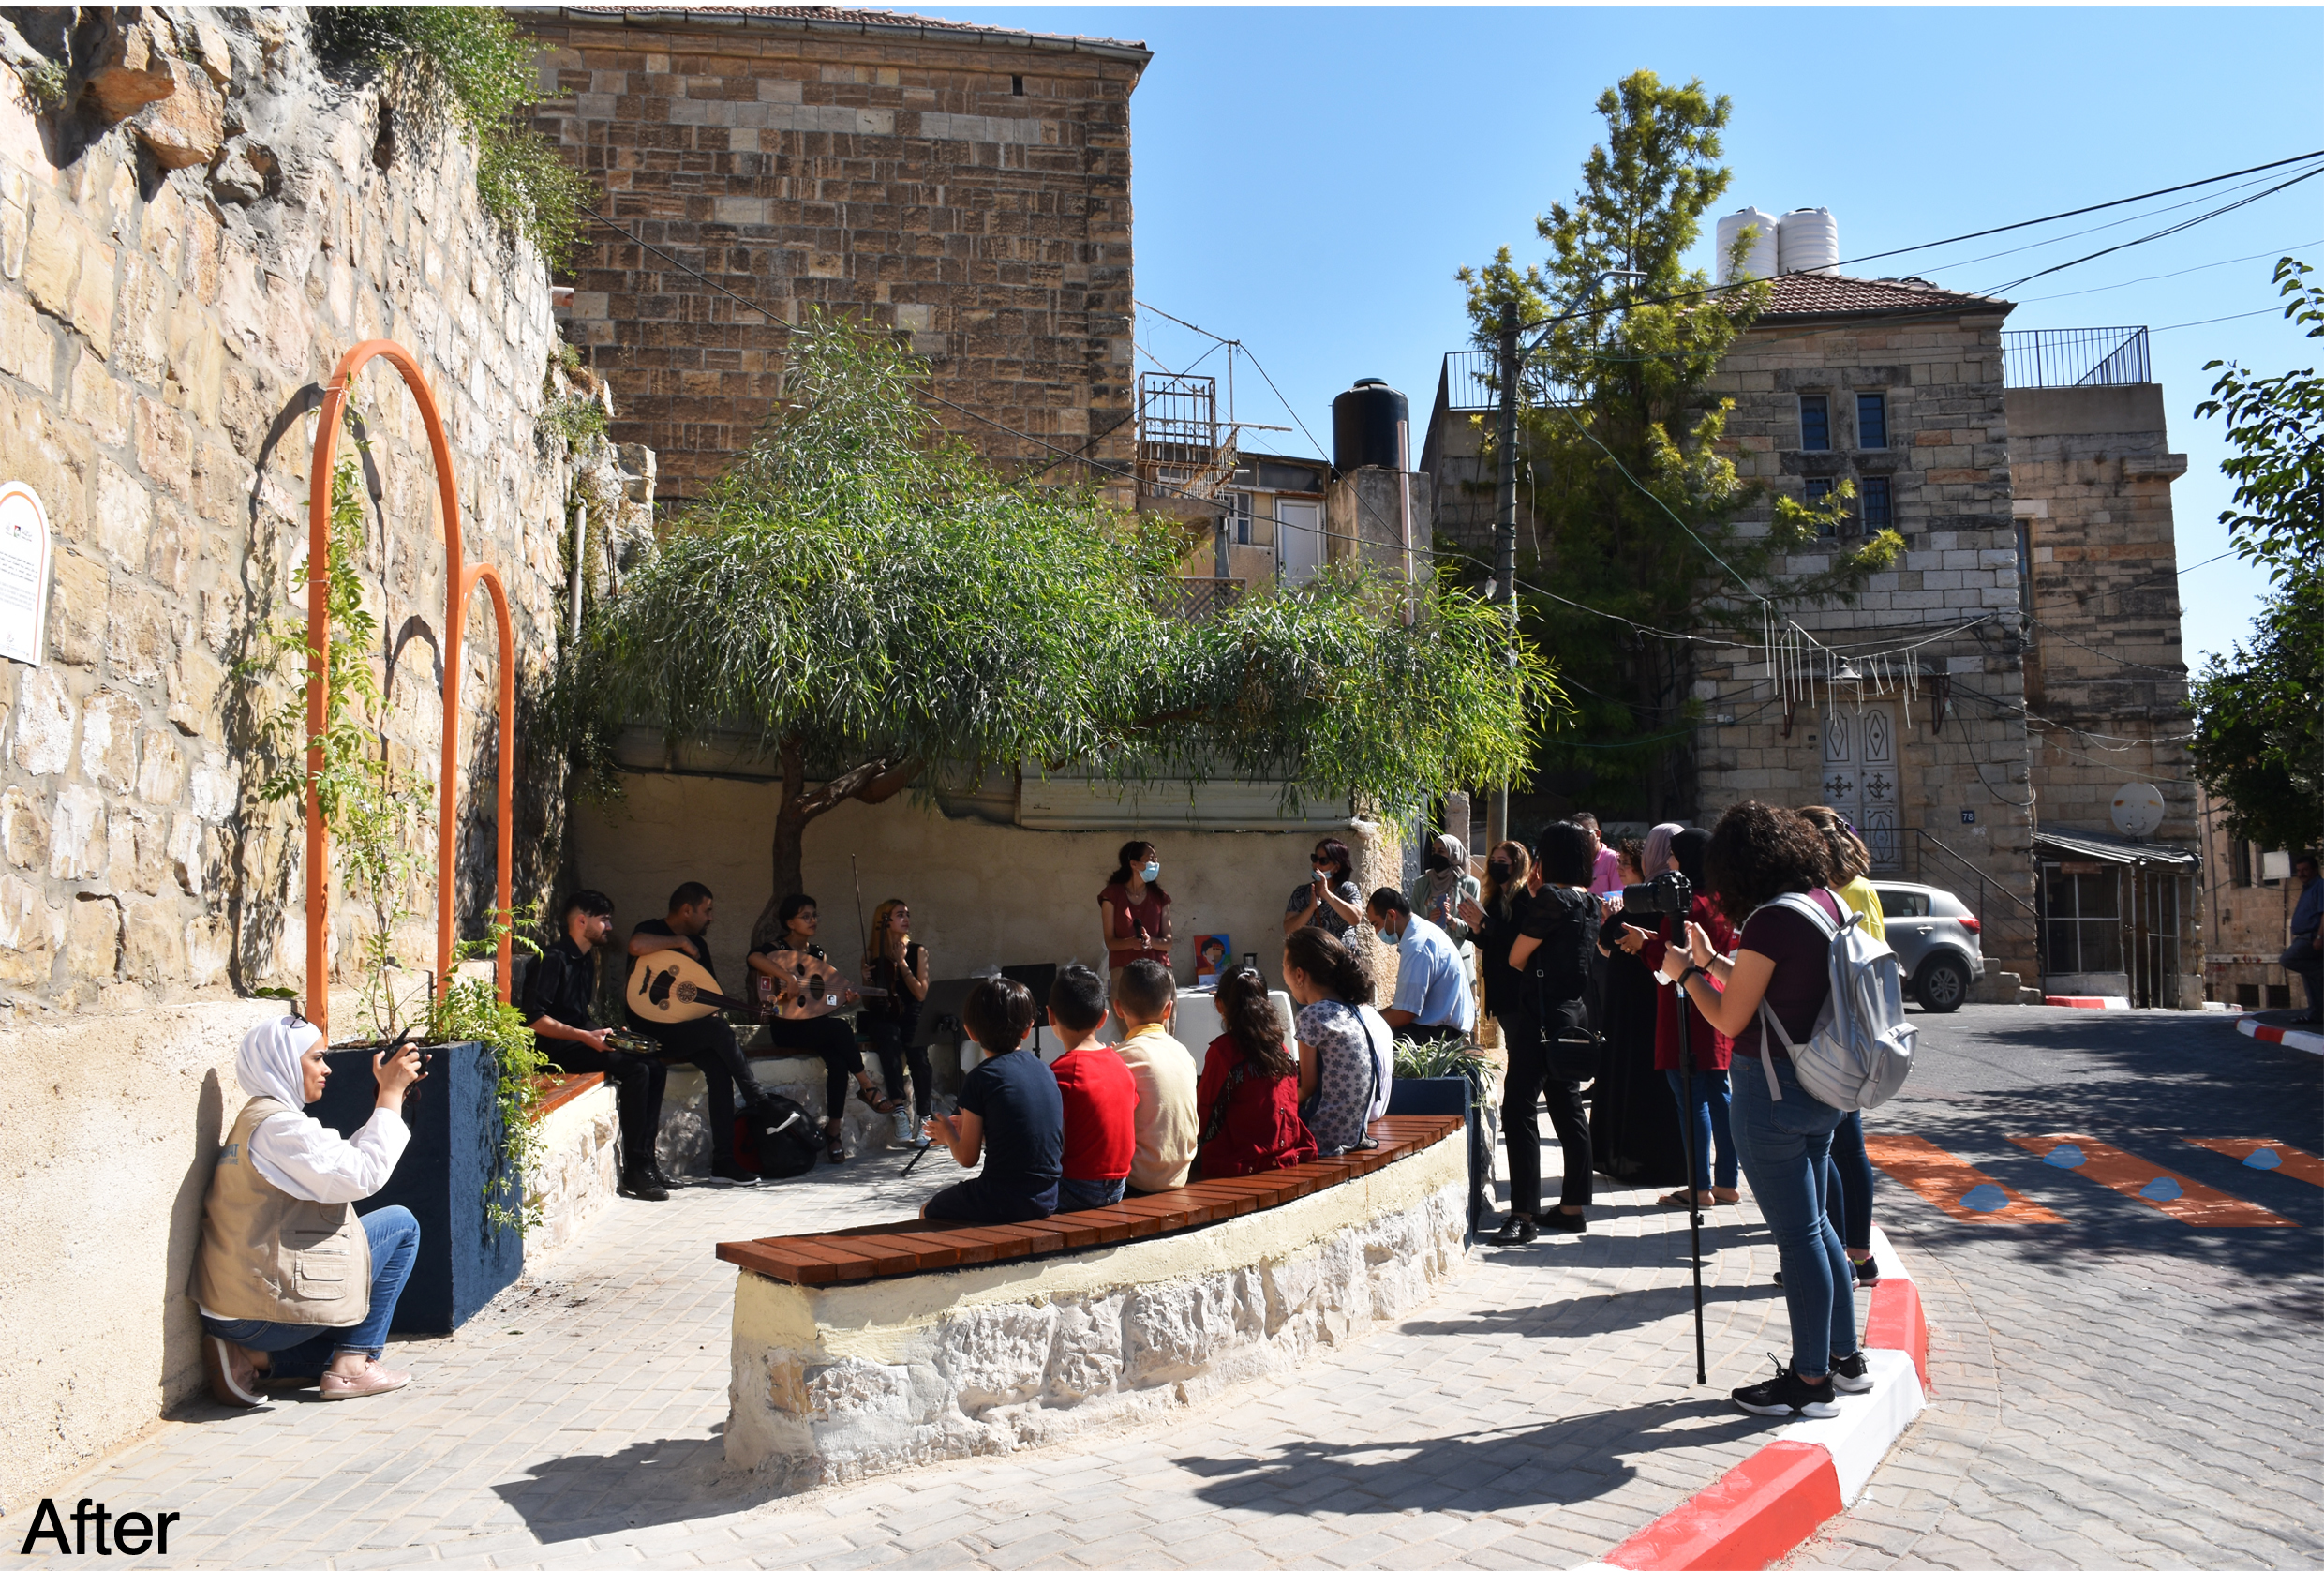 Vernacular architecture gives impetus for social gathering space for women in Ramallah